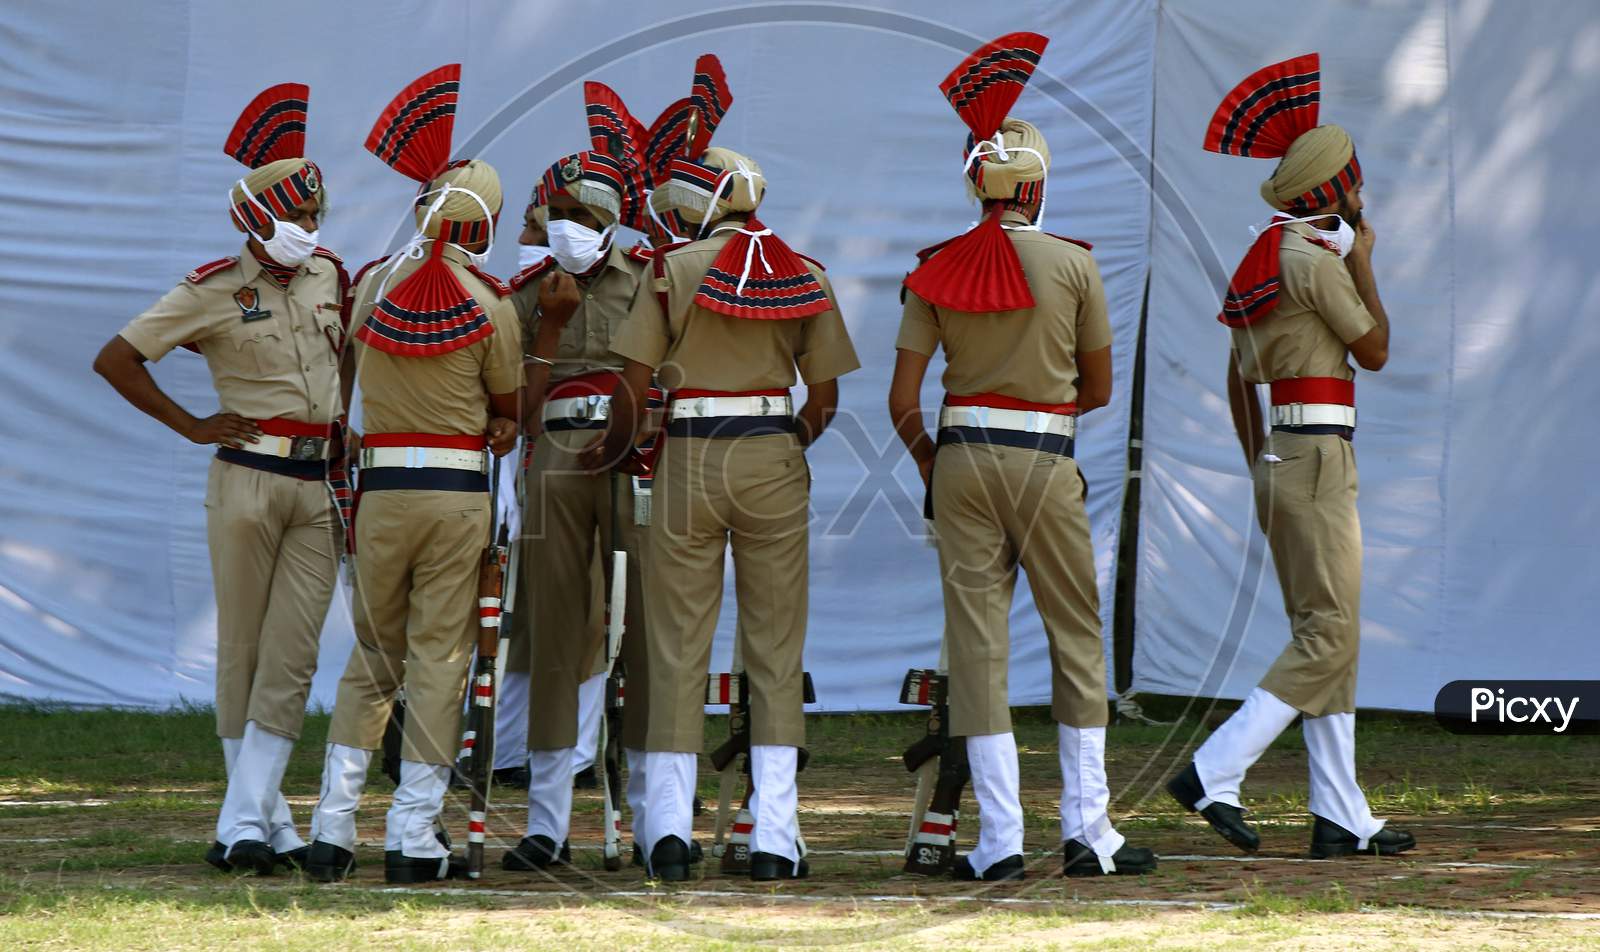 Policemen stand after taking part in India's 74th Independence Day celebrations In Chandigarh August 15, 2020